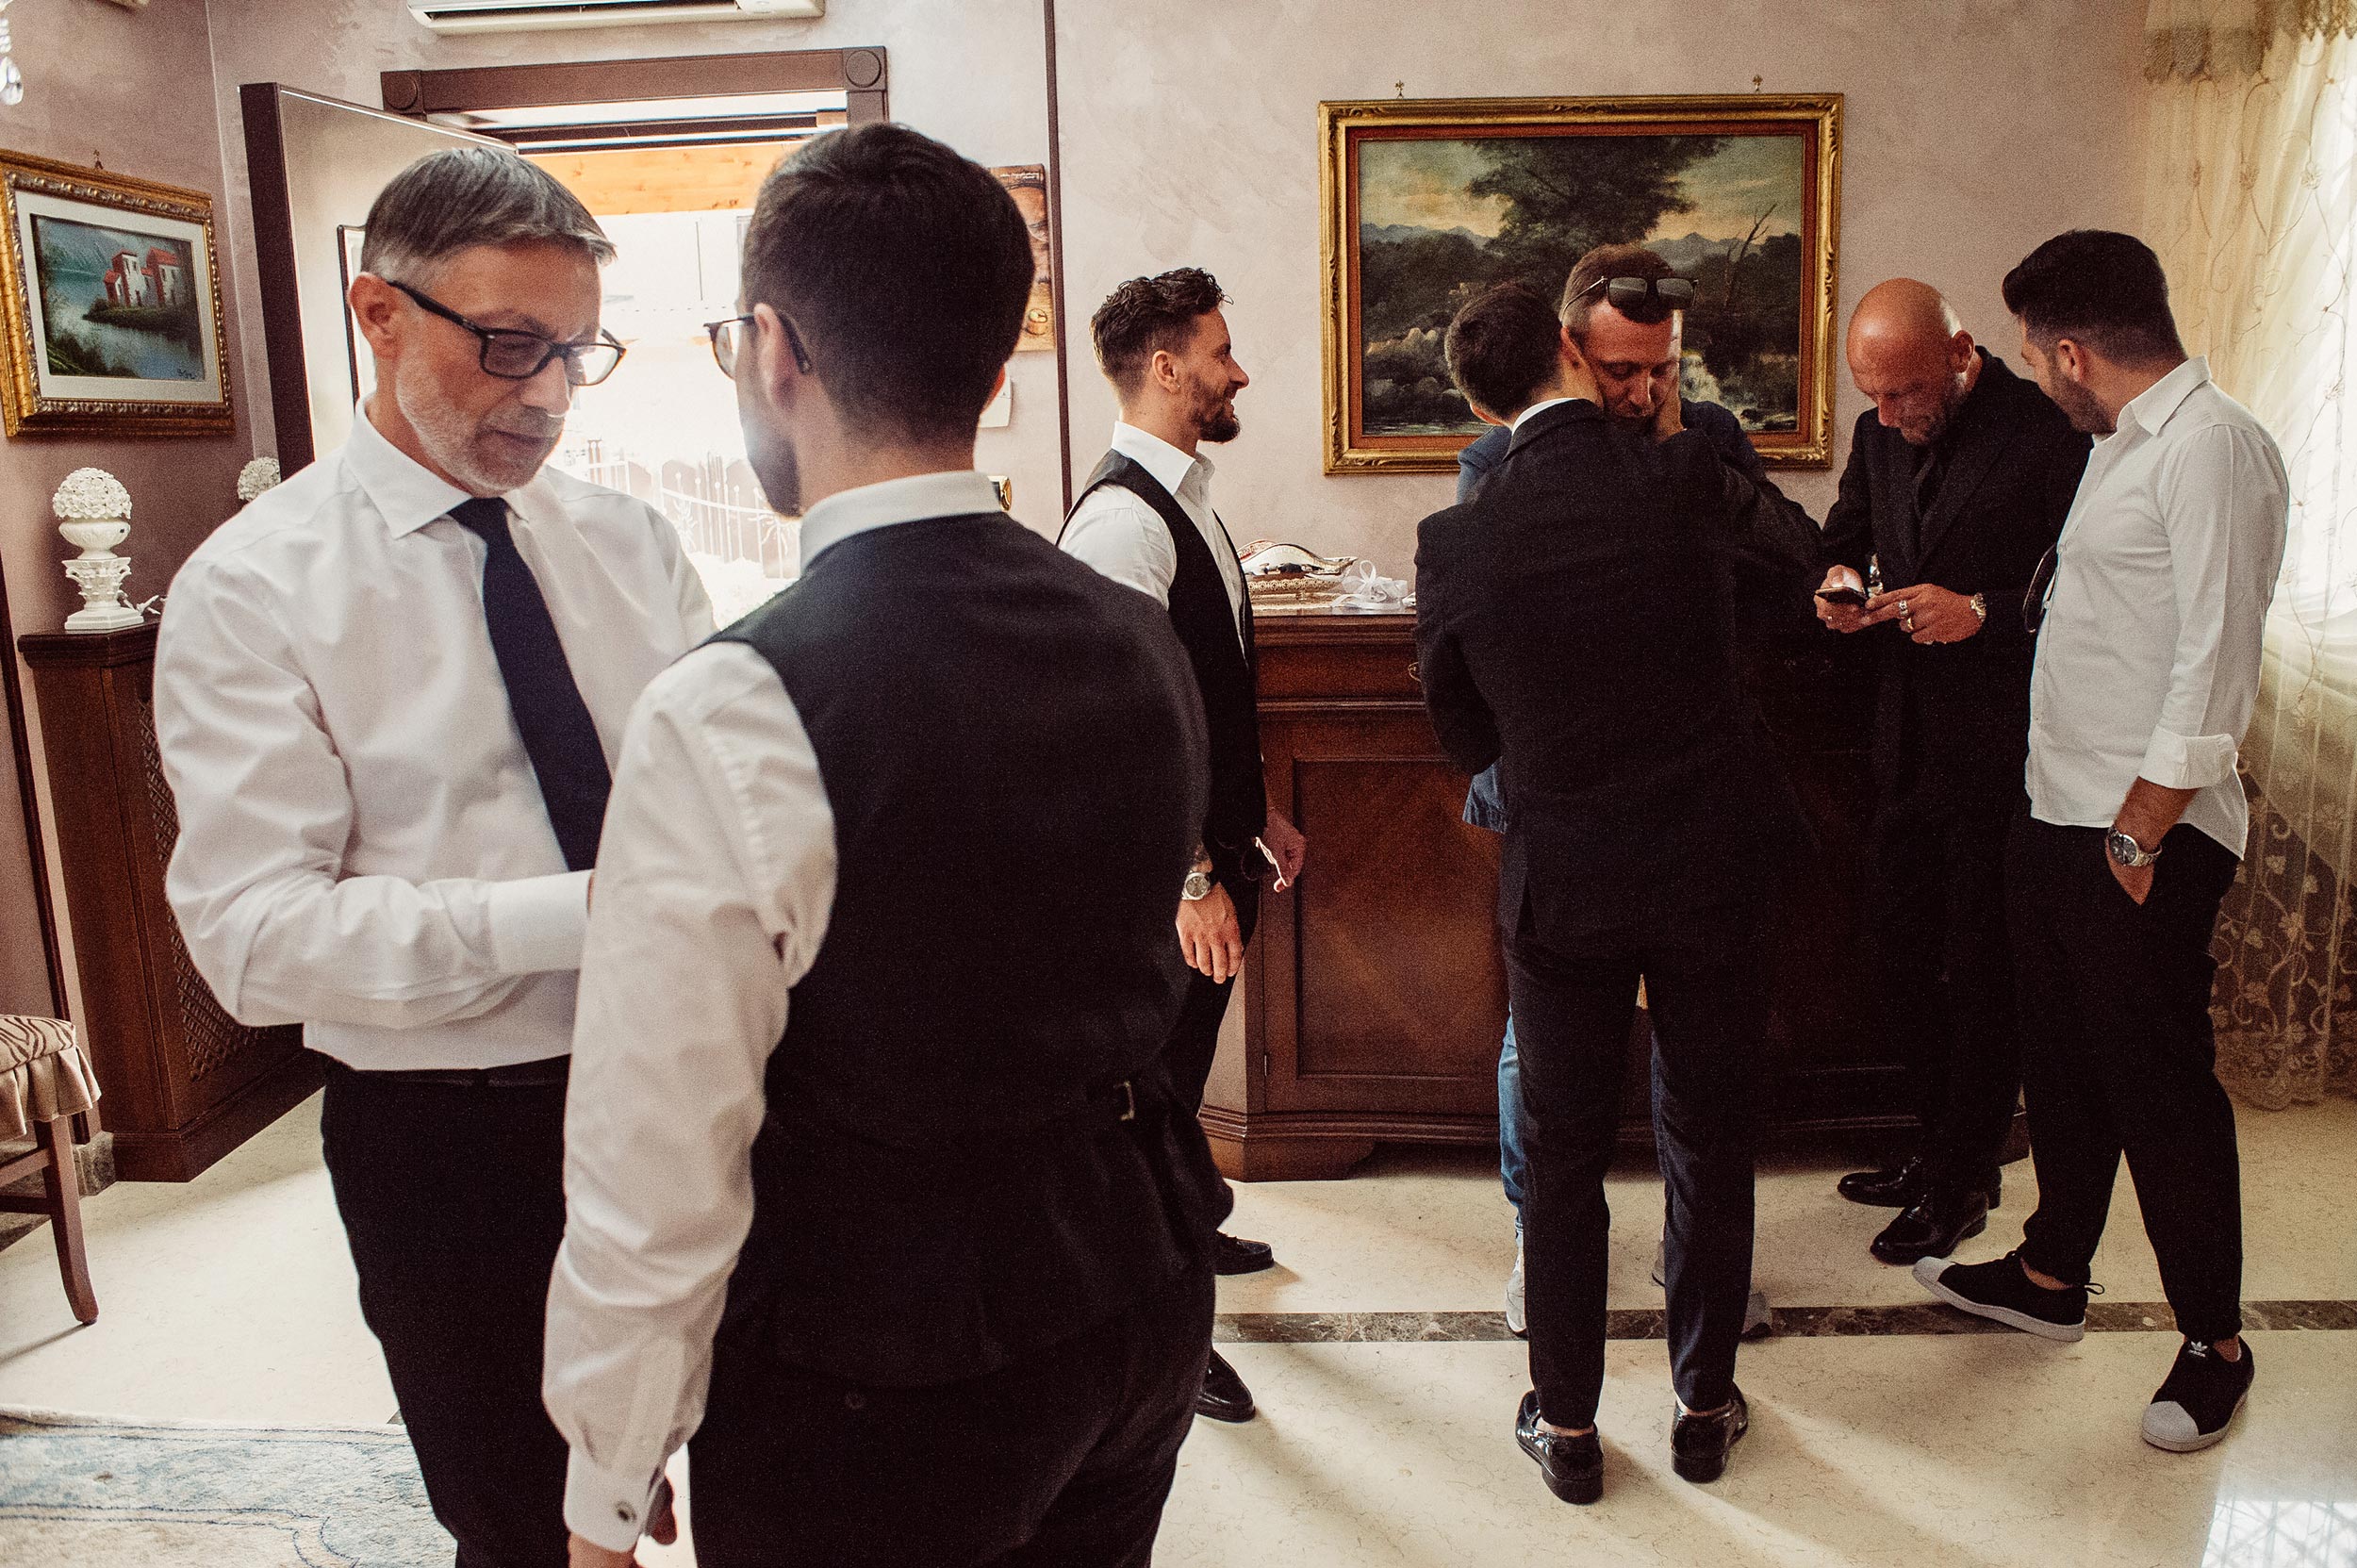 wedding-in-naples-the-grooms-relatives-and-friends.jpg